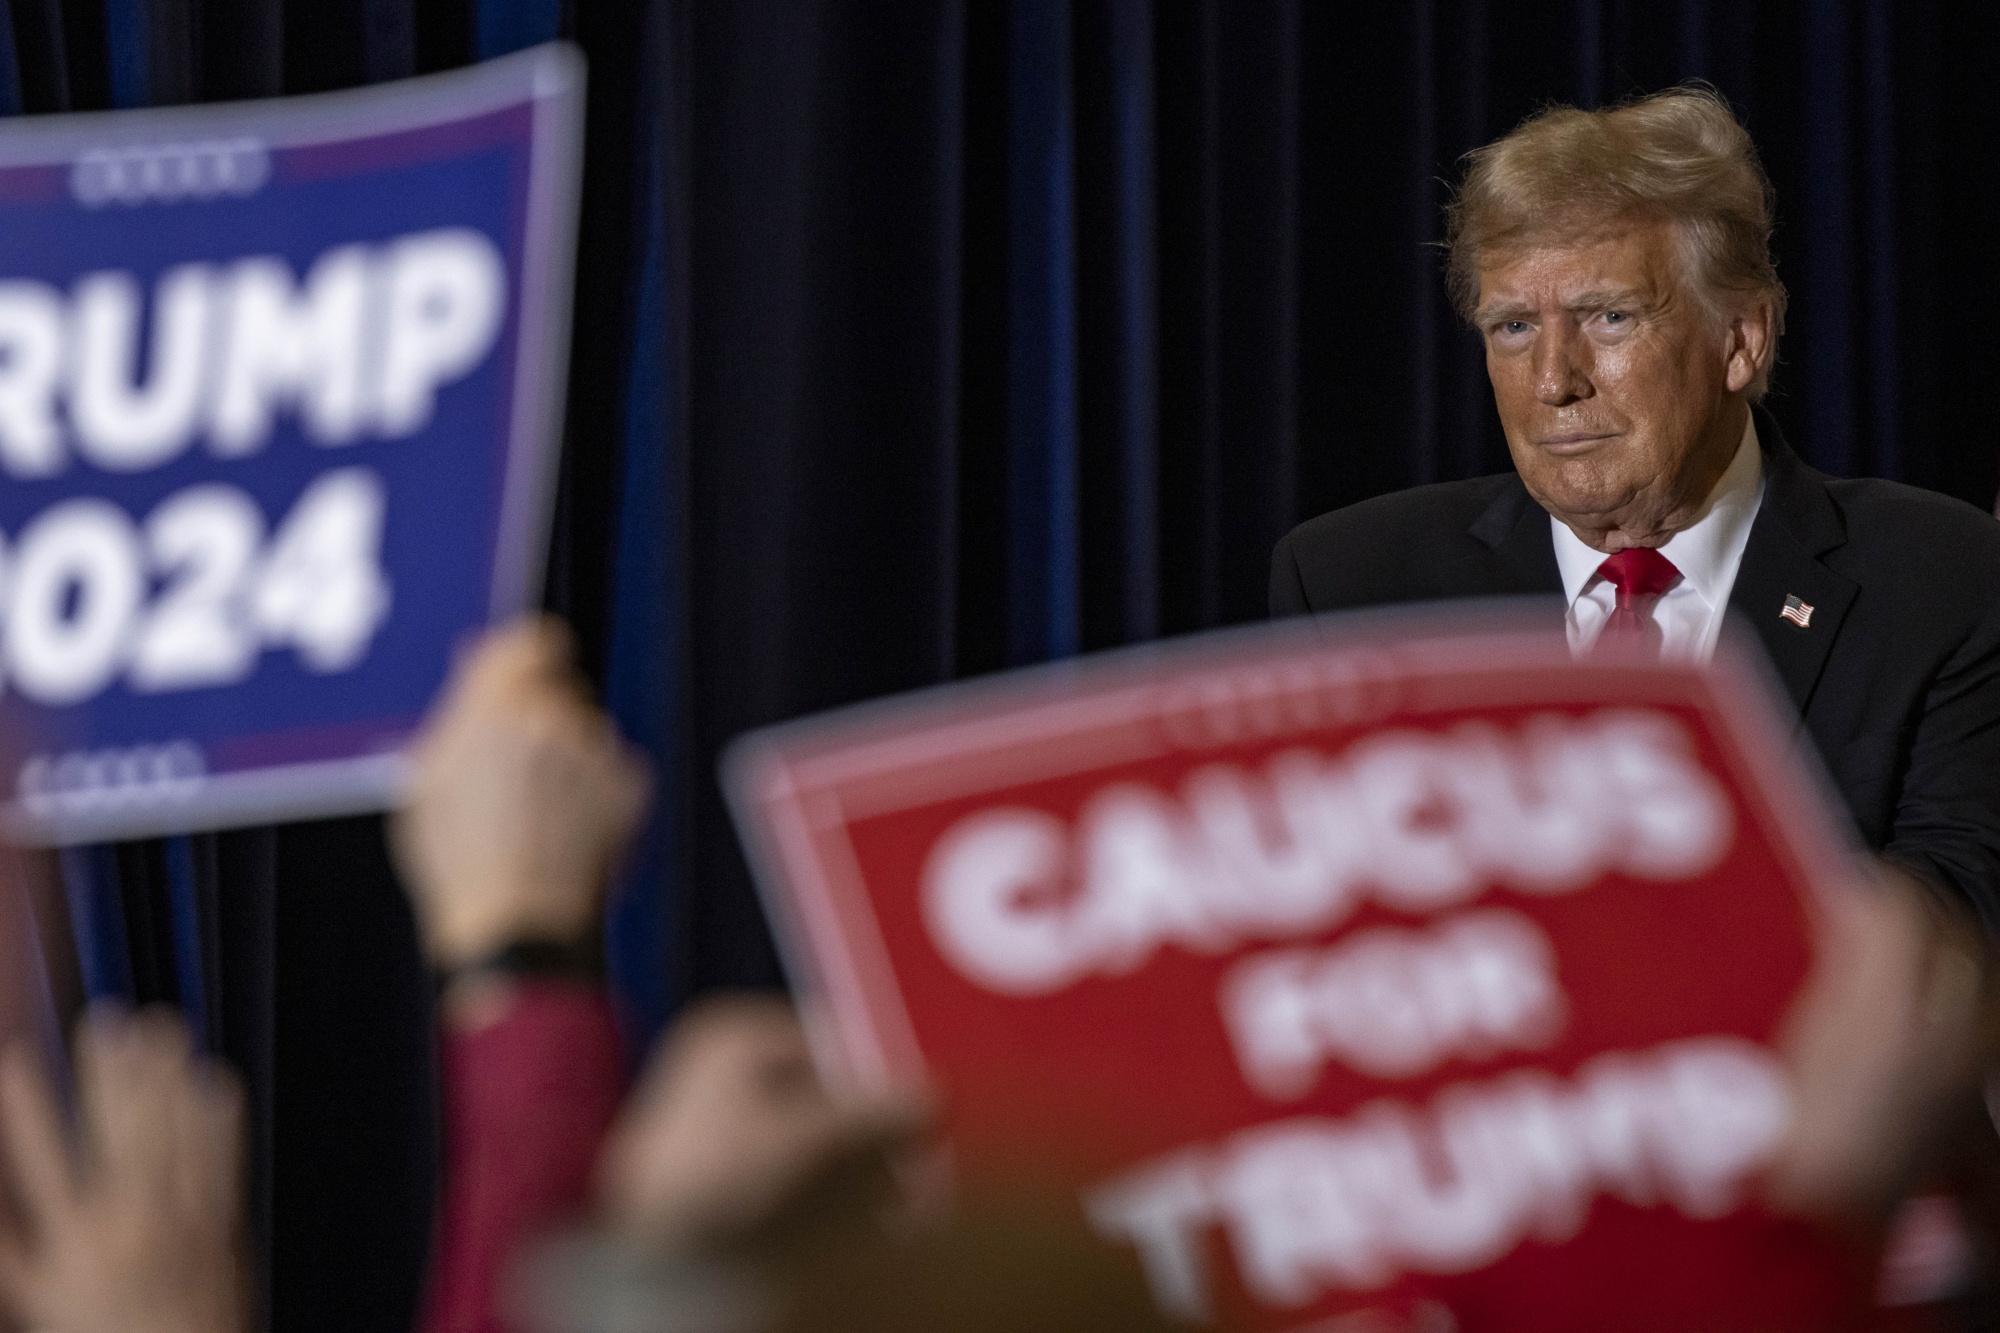 Donald Trump during a campaign rally in Coralville, Iowa, on Dec. 13.